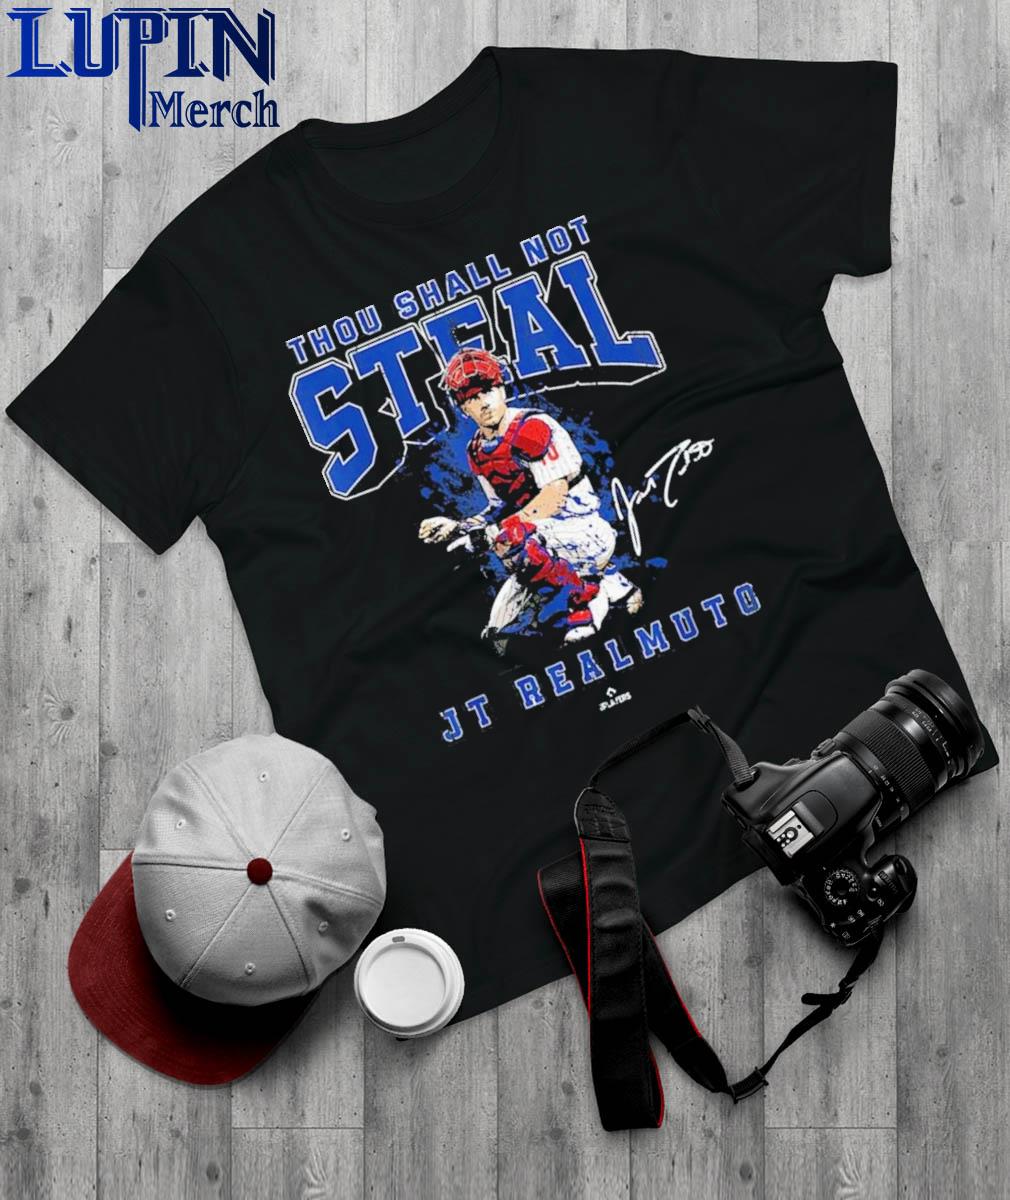 Thou Shall Not Steal Jt Realmuto Philadelphia Mlbpa T Shirt, hoodie, sweater  and long sleeve